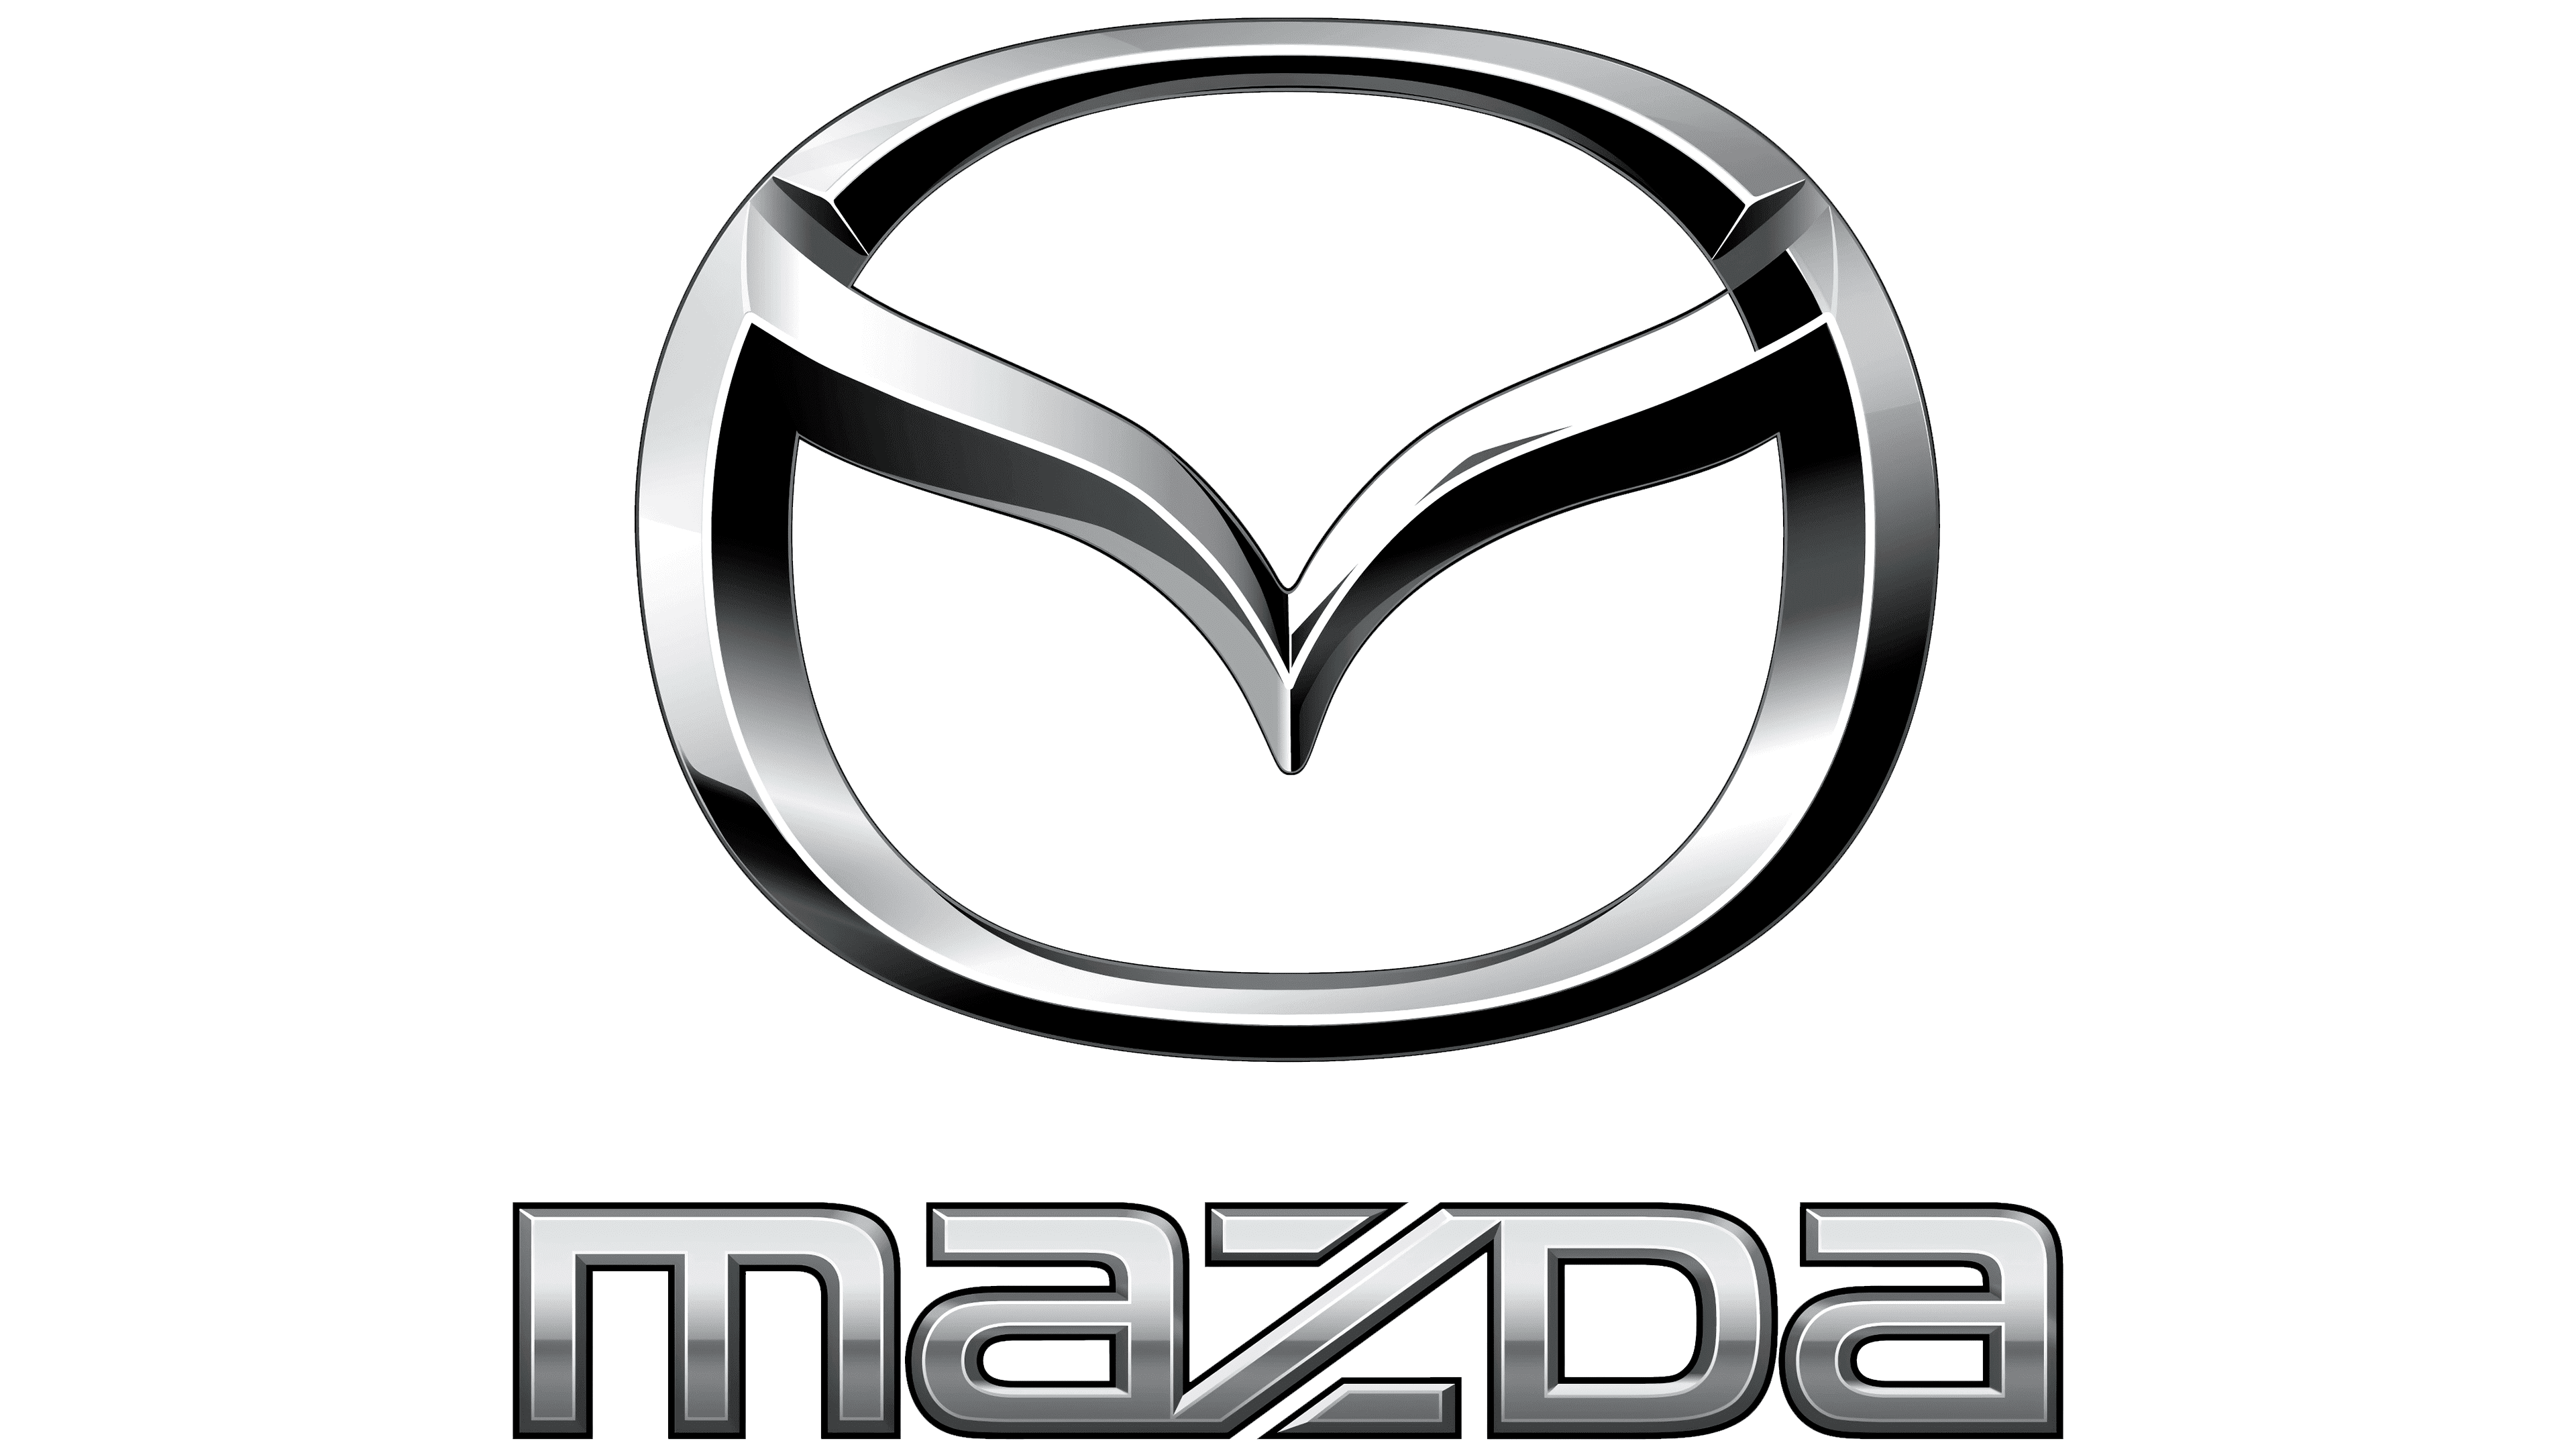 Mazda Logo Marques Et Logos Histoire Et Signification Png | Images and ...